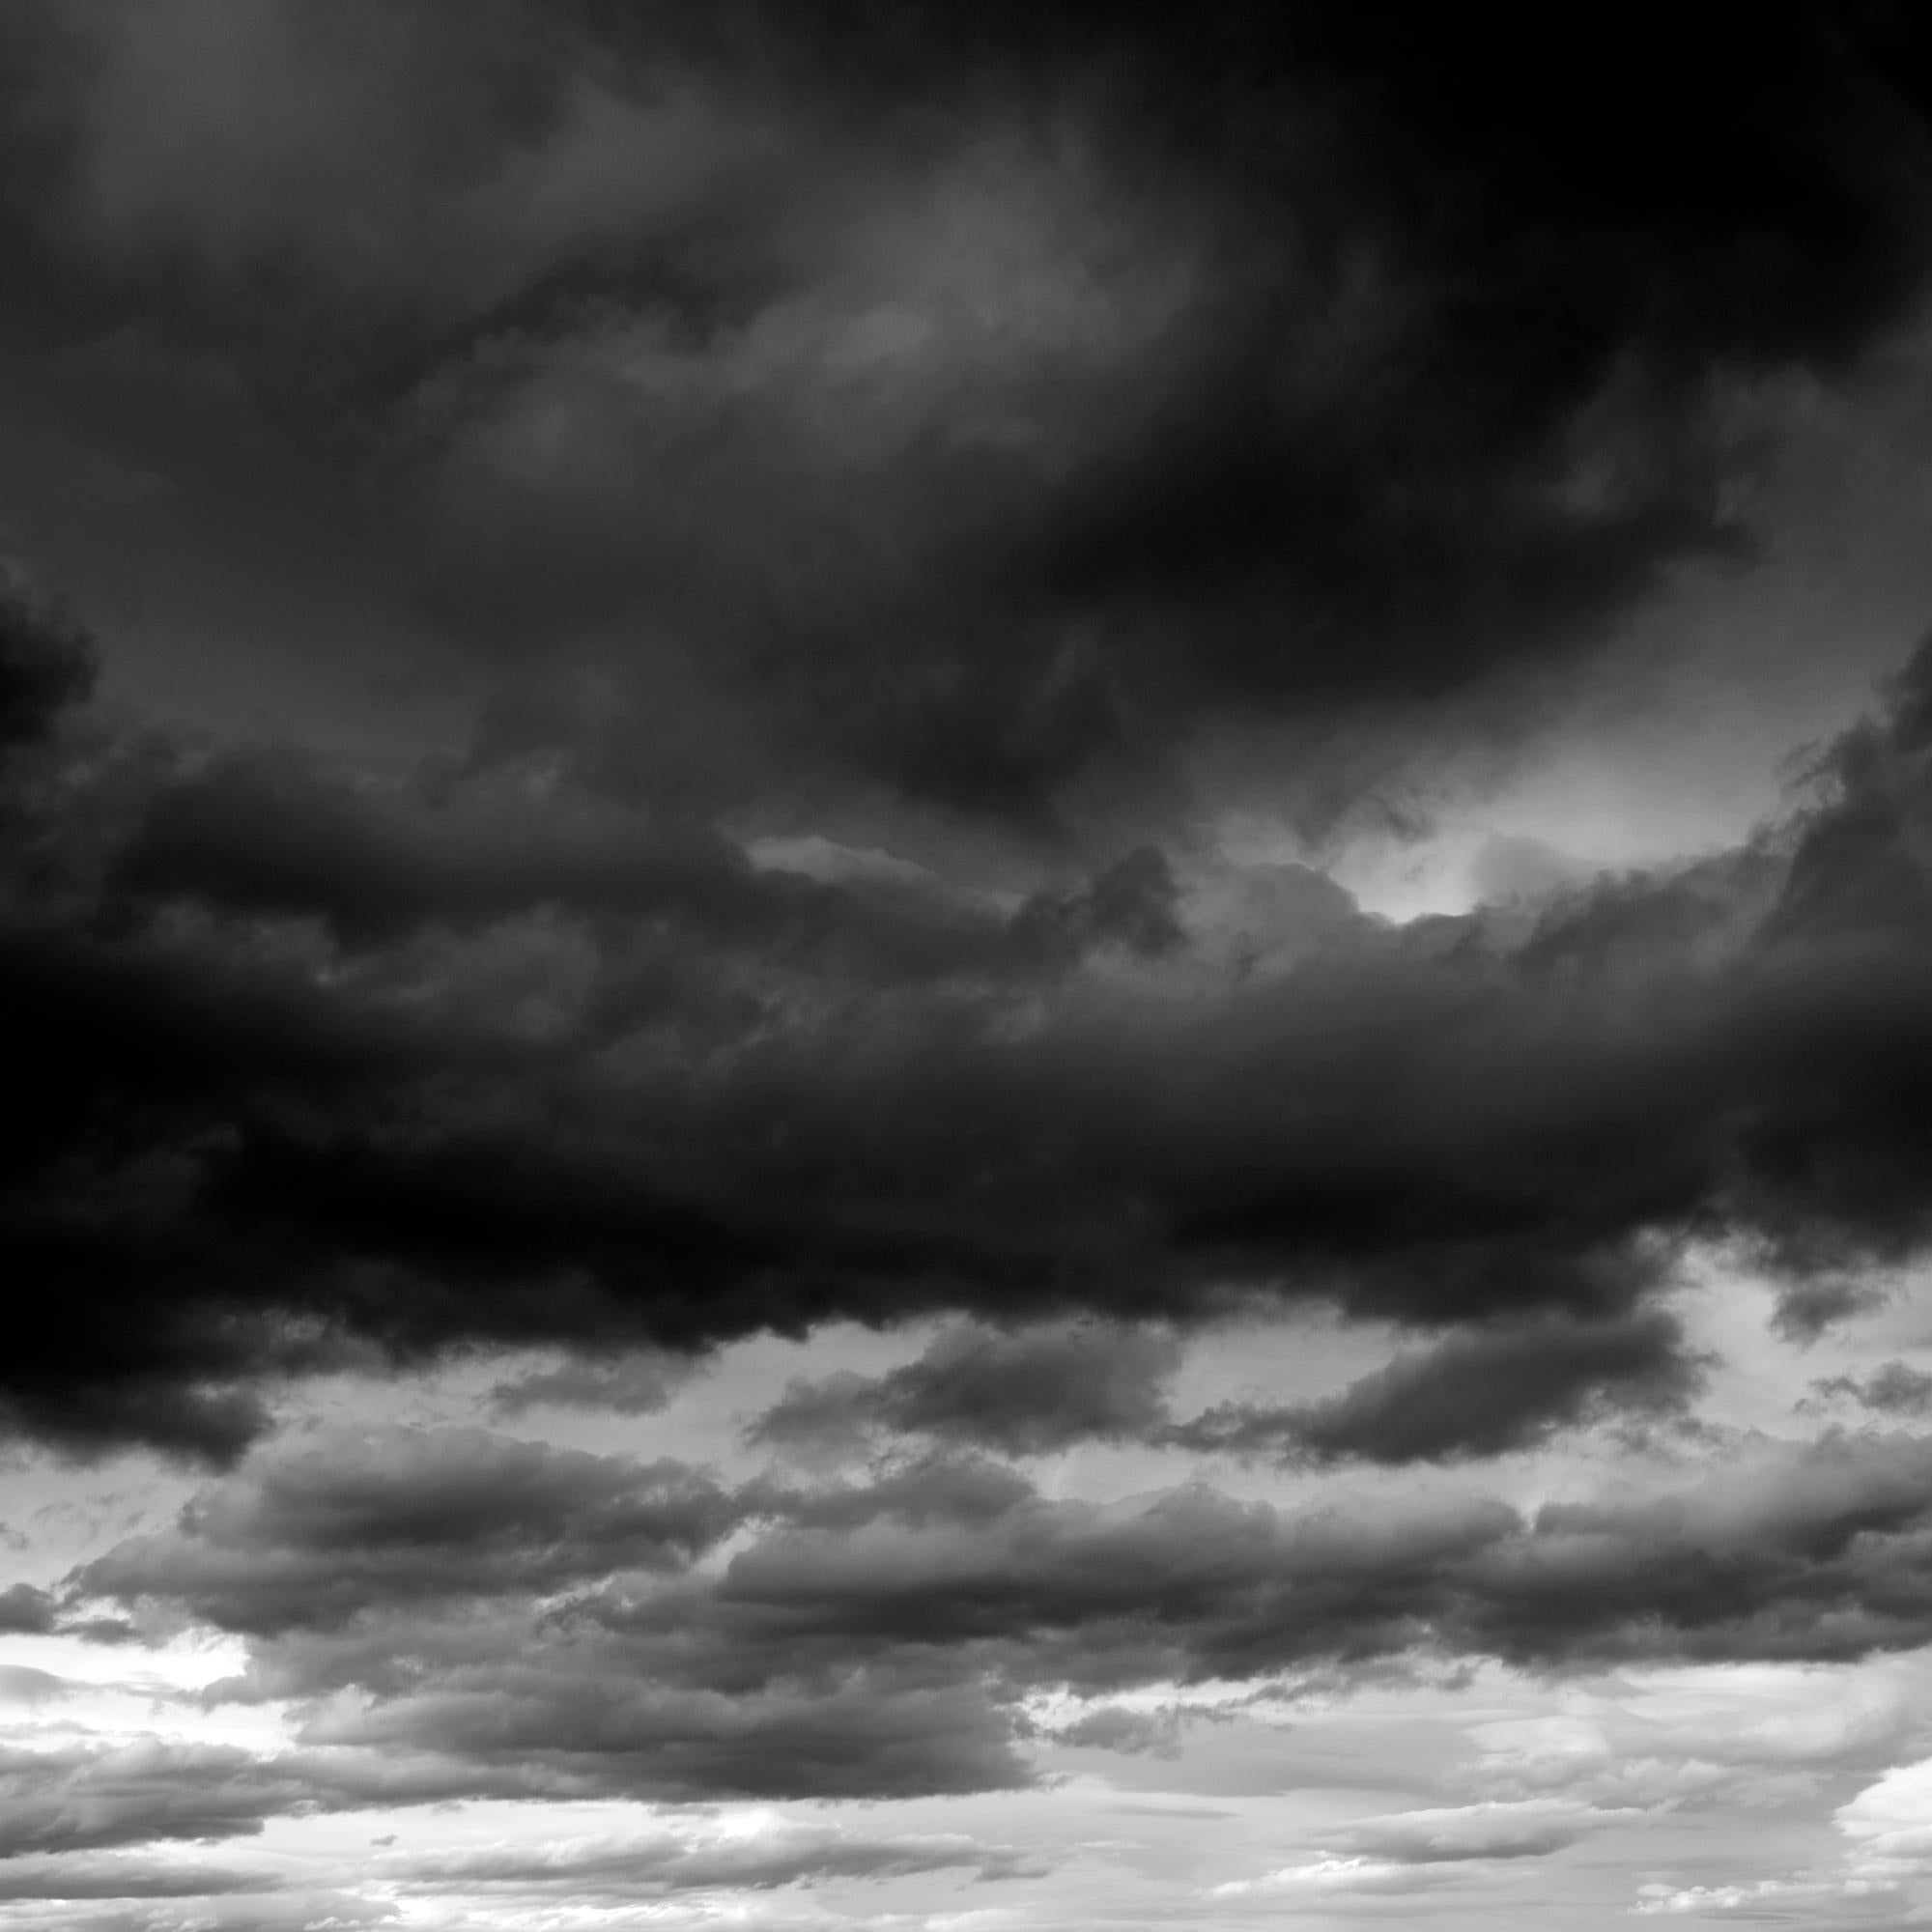 Cloud Study III - large format photograph of dramatic cloudscape sky